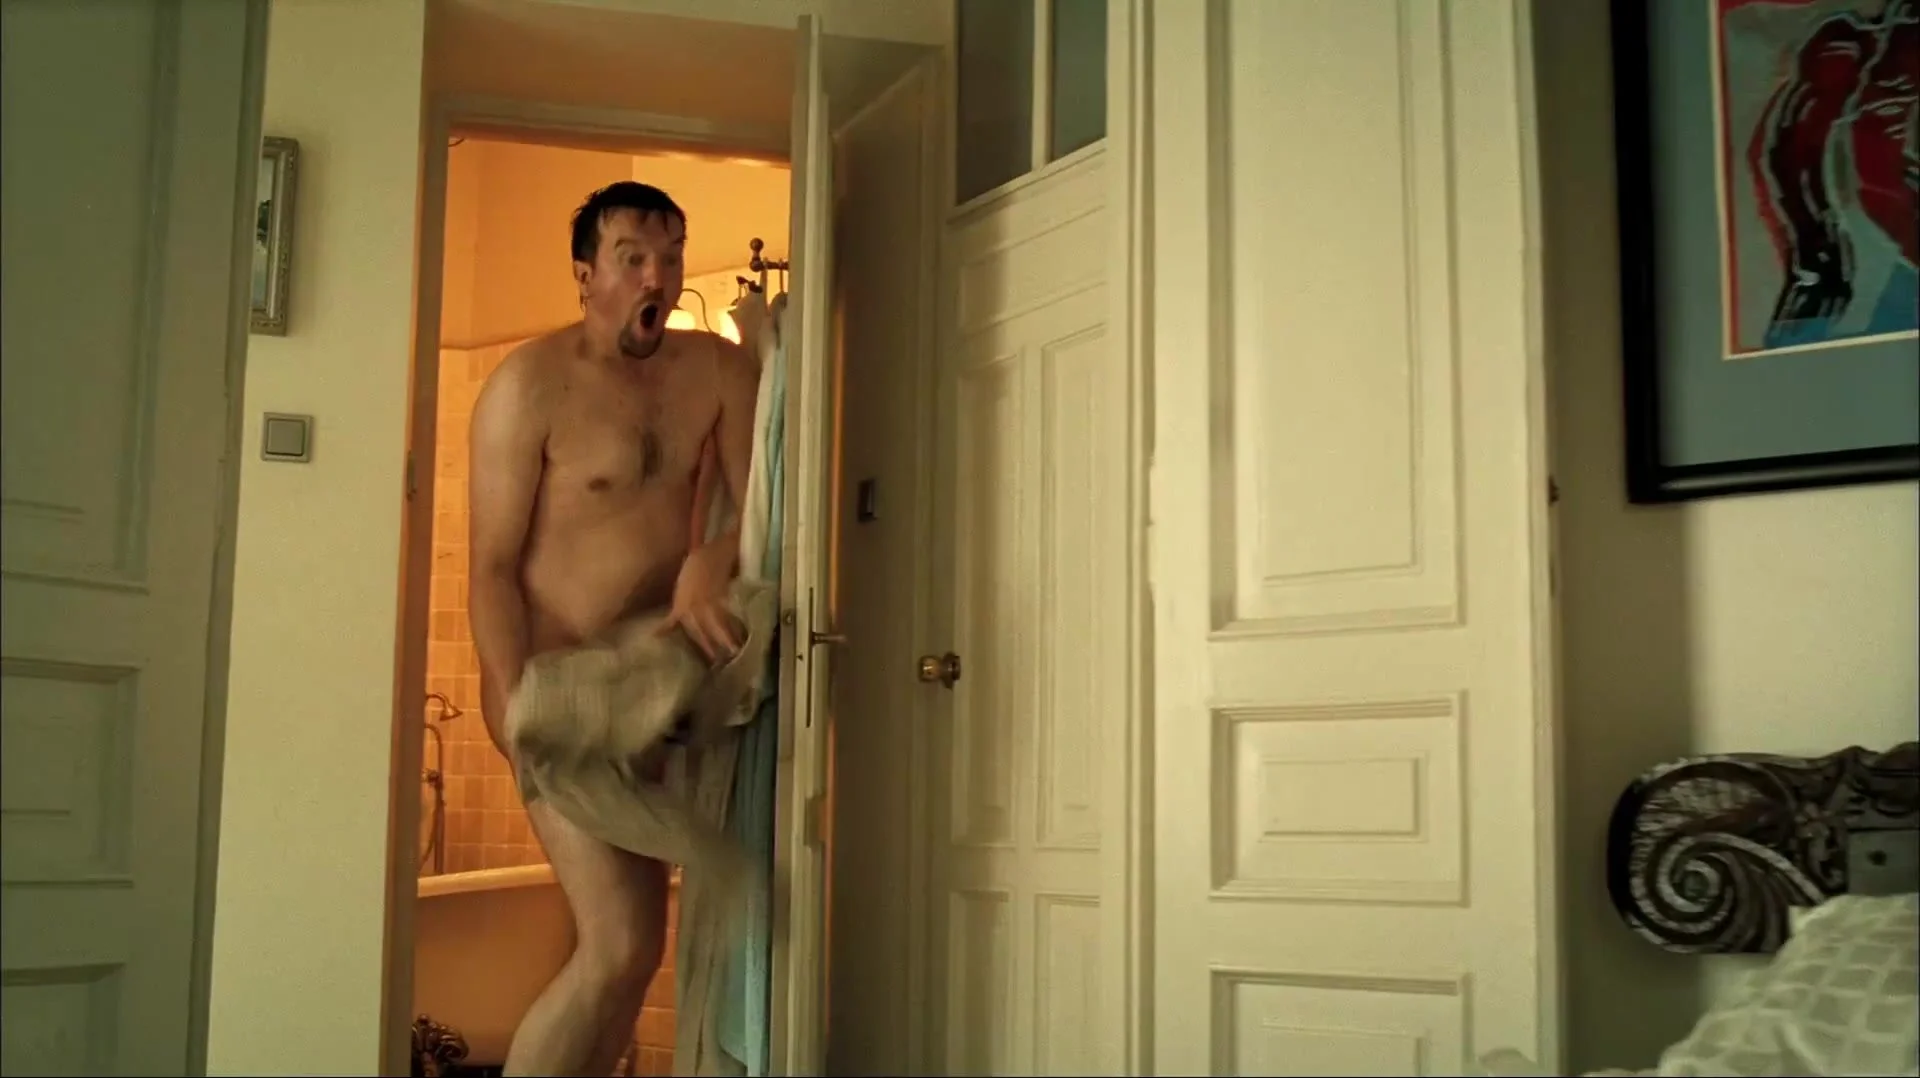 Naked men in movie: Embarrassing moment afterâ€¦ ThisVid.com